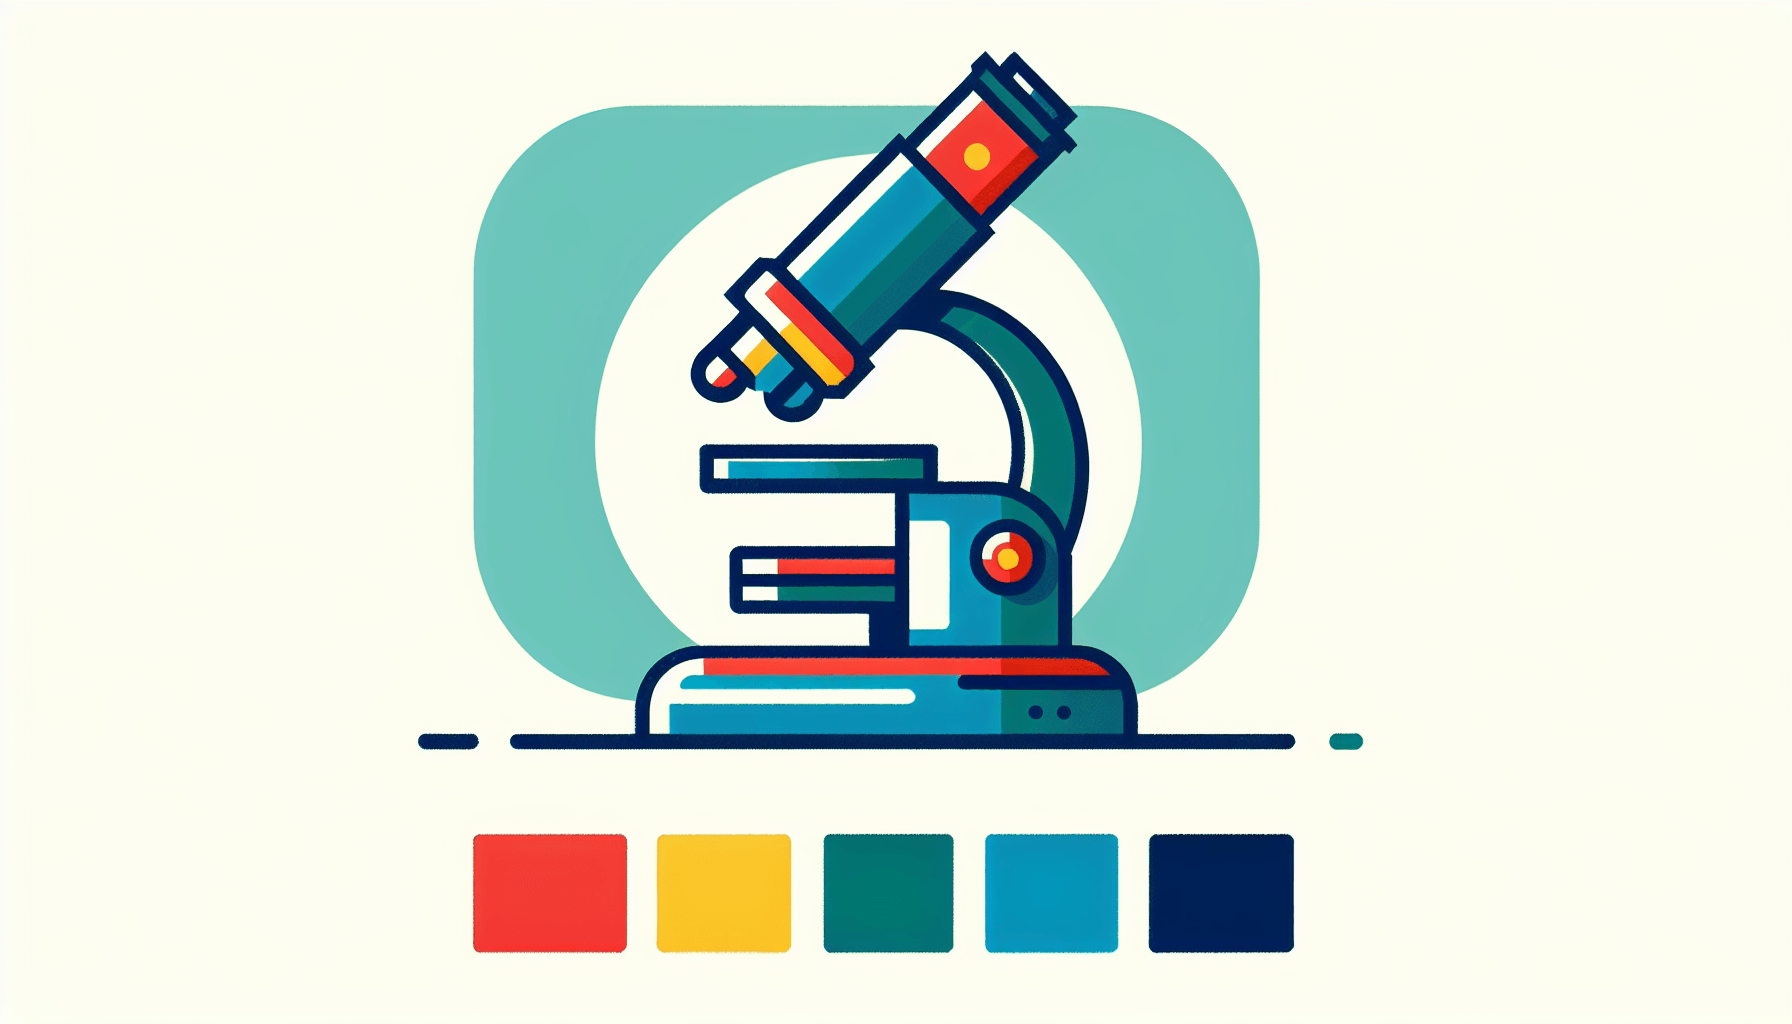 Microscope in flat illustration style and white background, red #f47574, green #88c7a8, yellow #fcc44b, and blue #645bc8 colors.